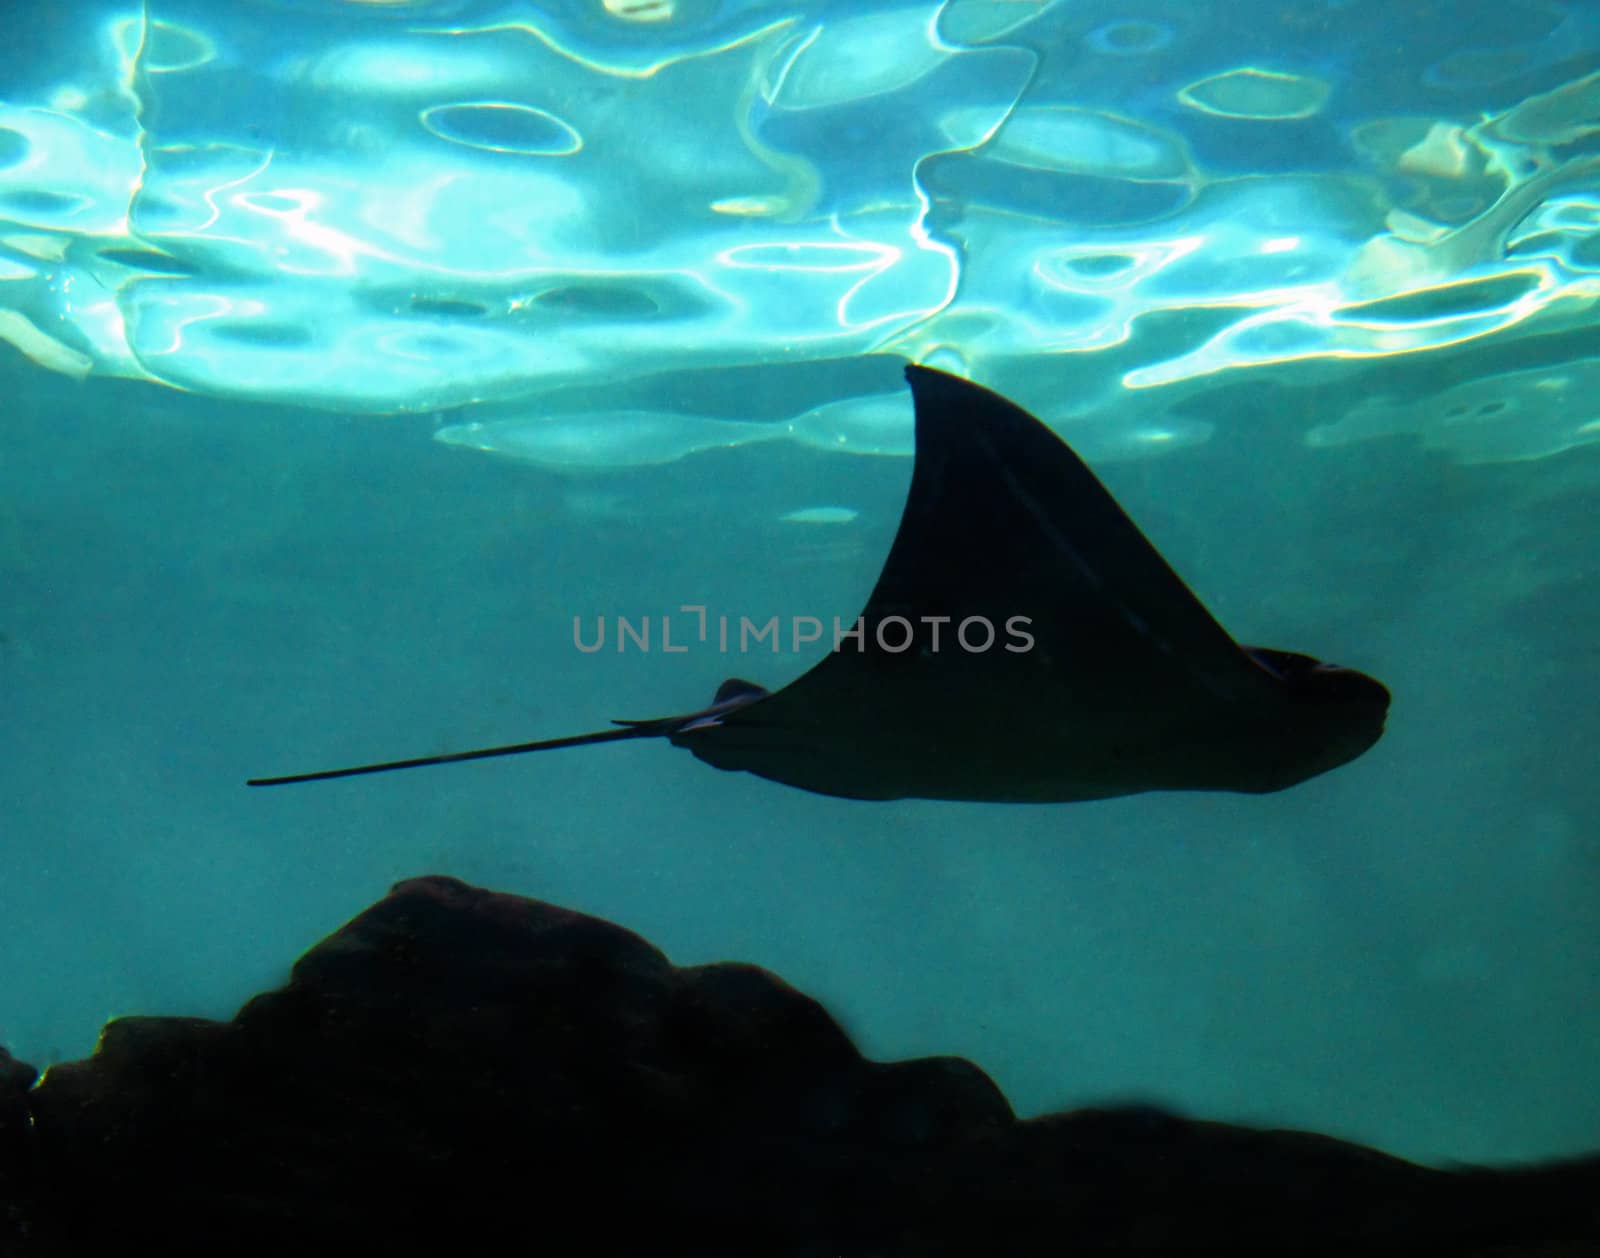 A stingray as a silhouette swimming through the water.